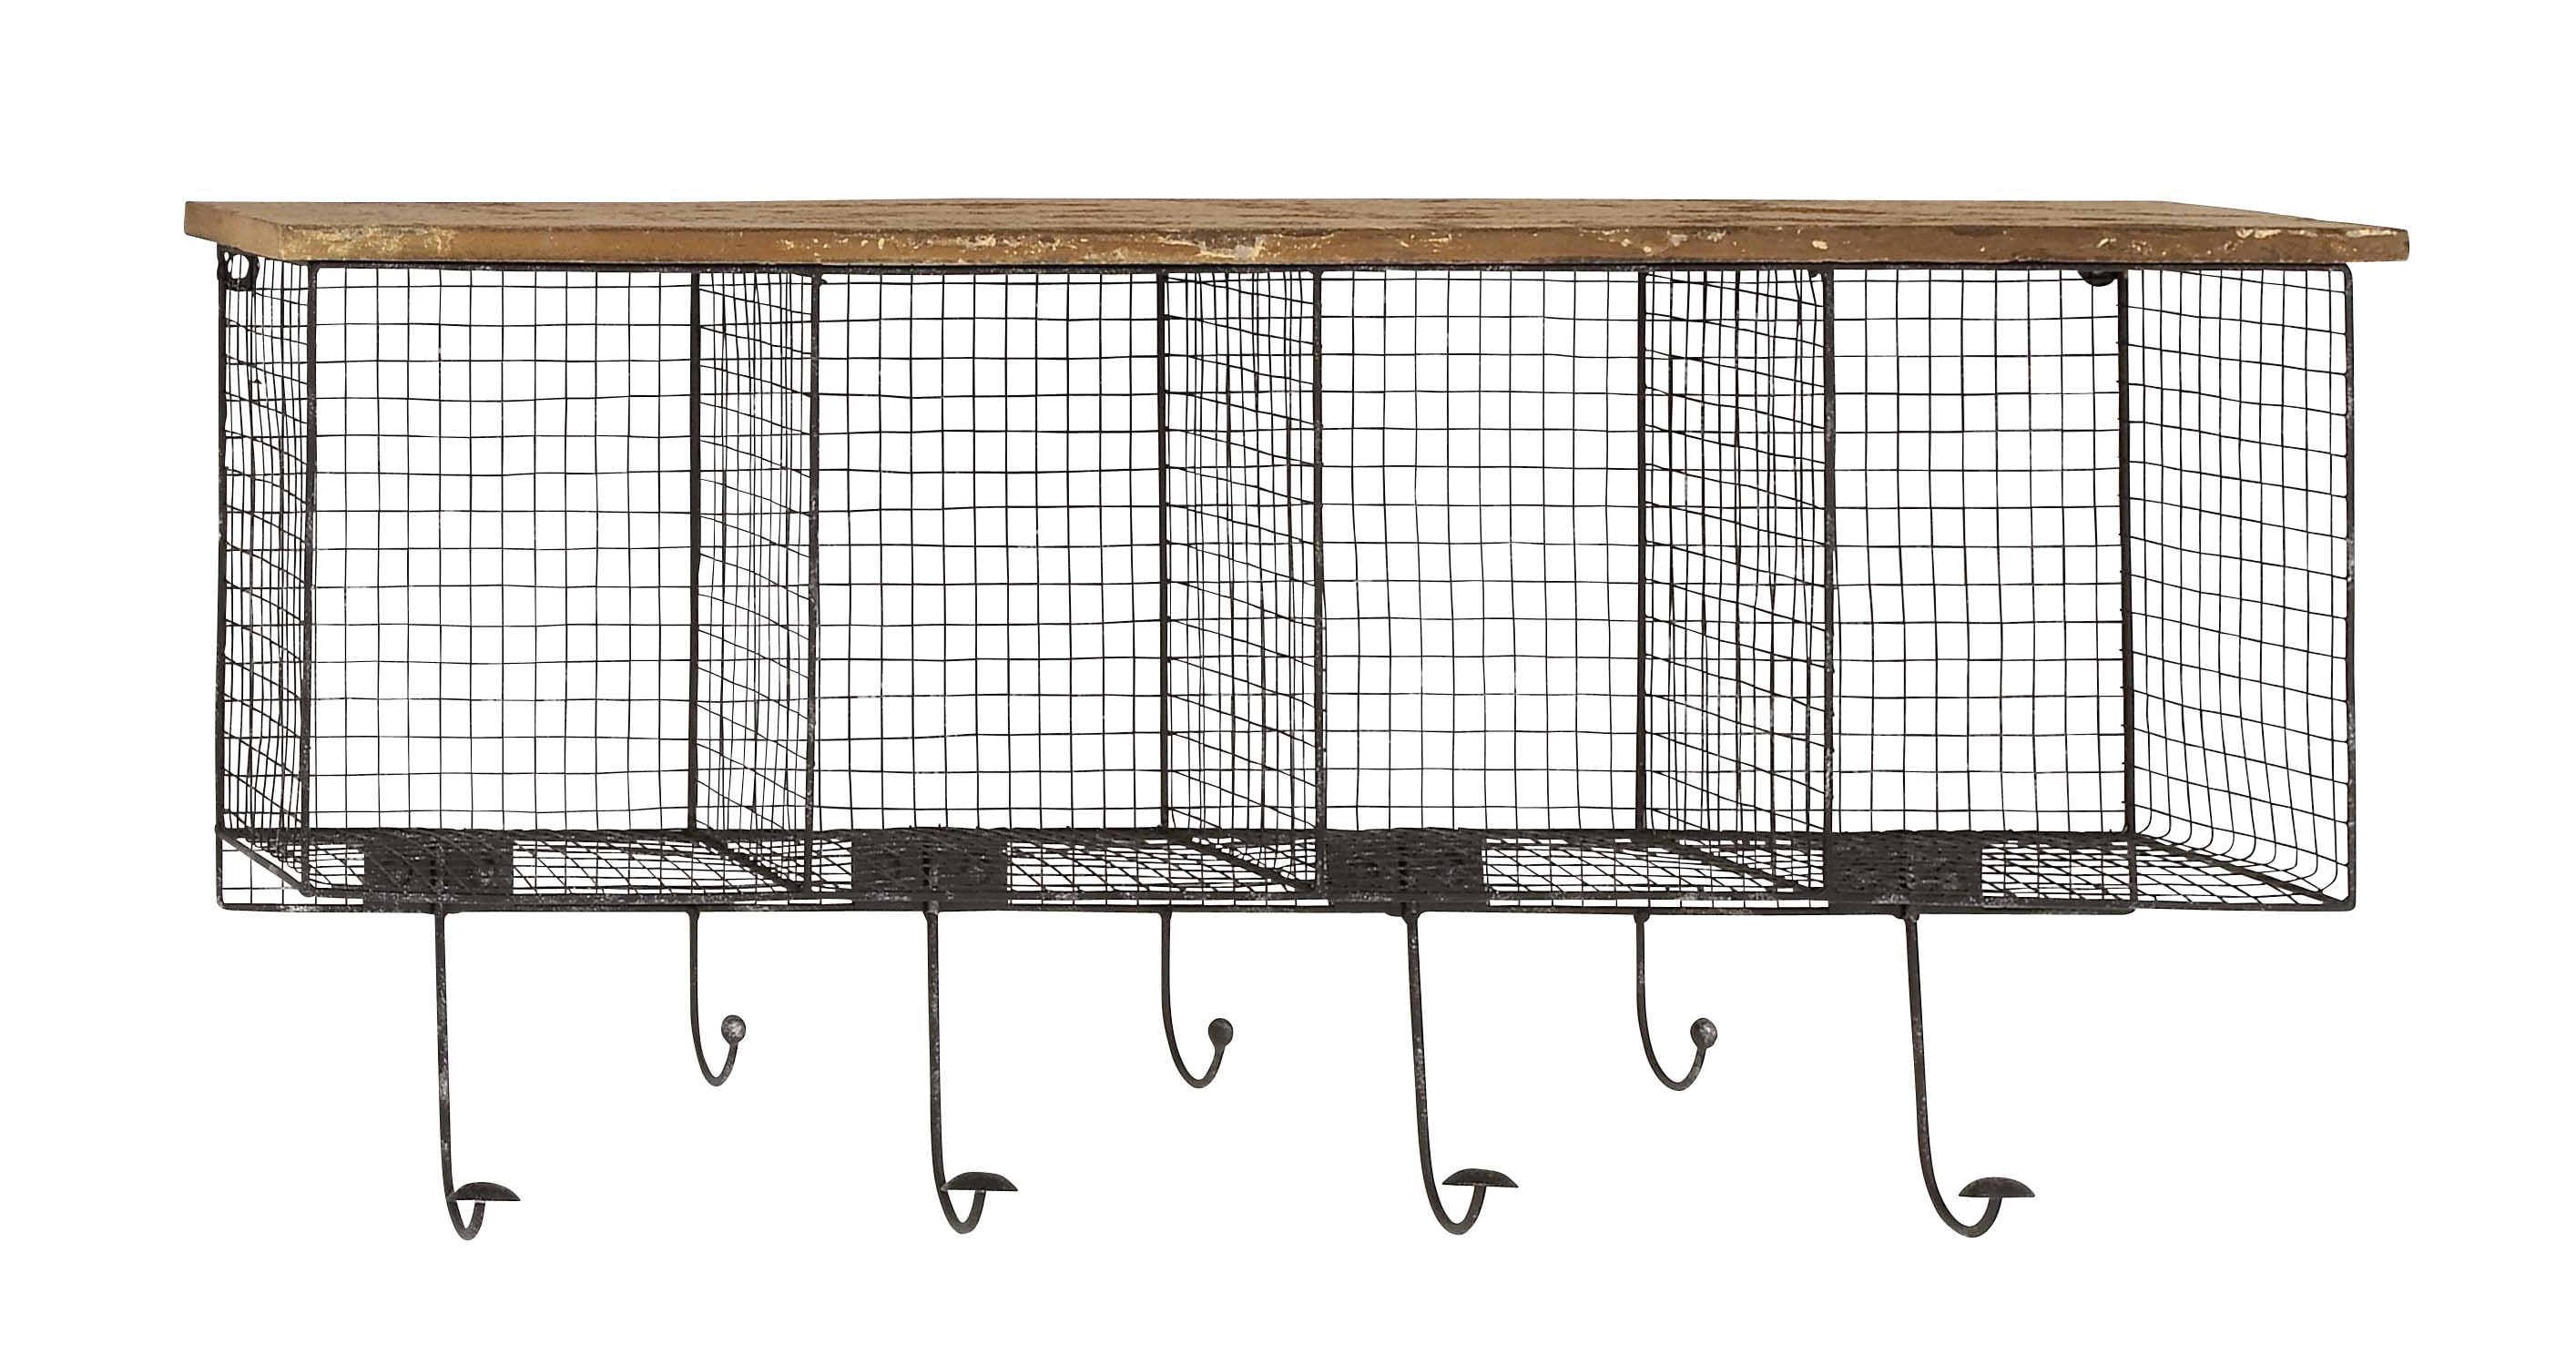 Grayson Lane 32-in x 14-in Black Iron Farmhouse Wall Hook Rack with Shelves  363070